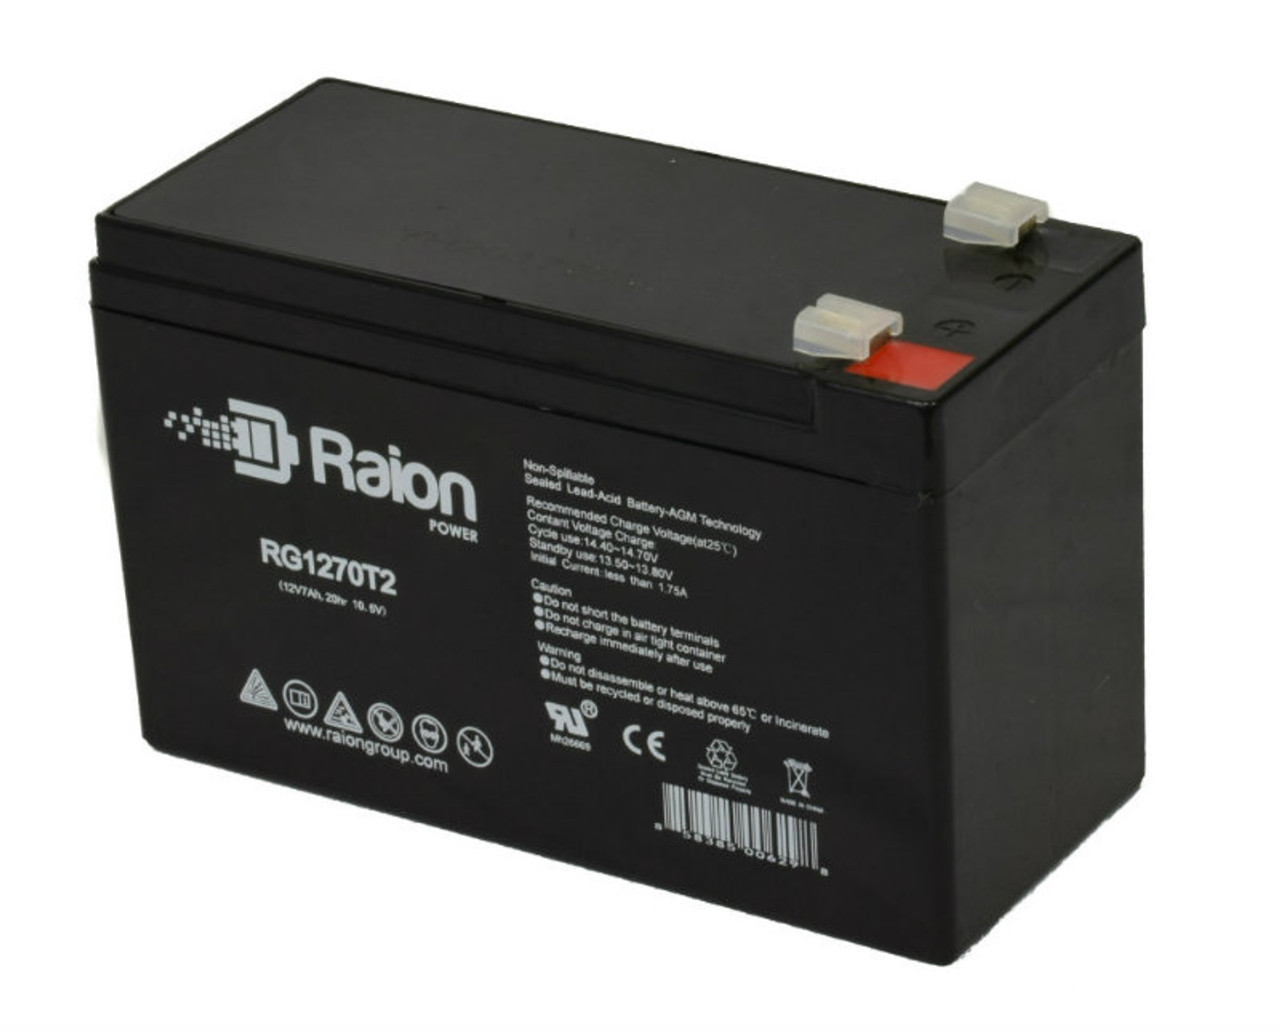 Raion Power Replacement RG1270T1 Battery for Bespoke Synergy Straight Stairlift